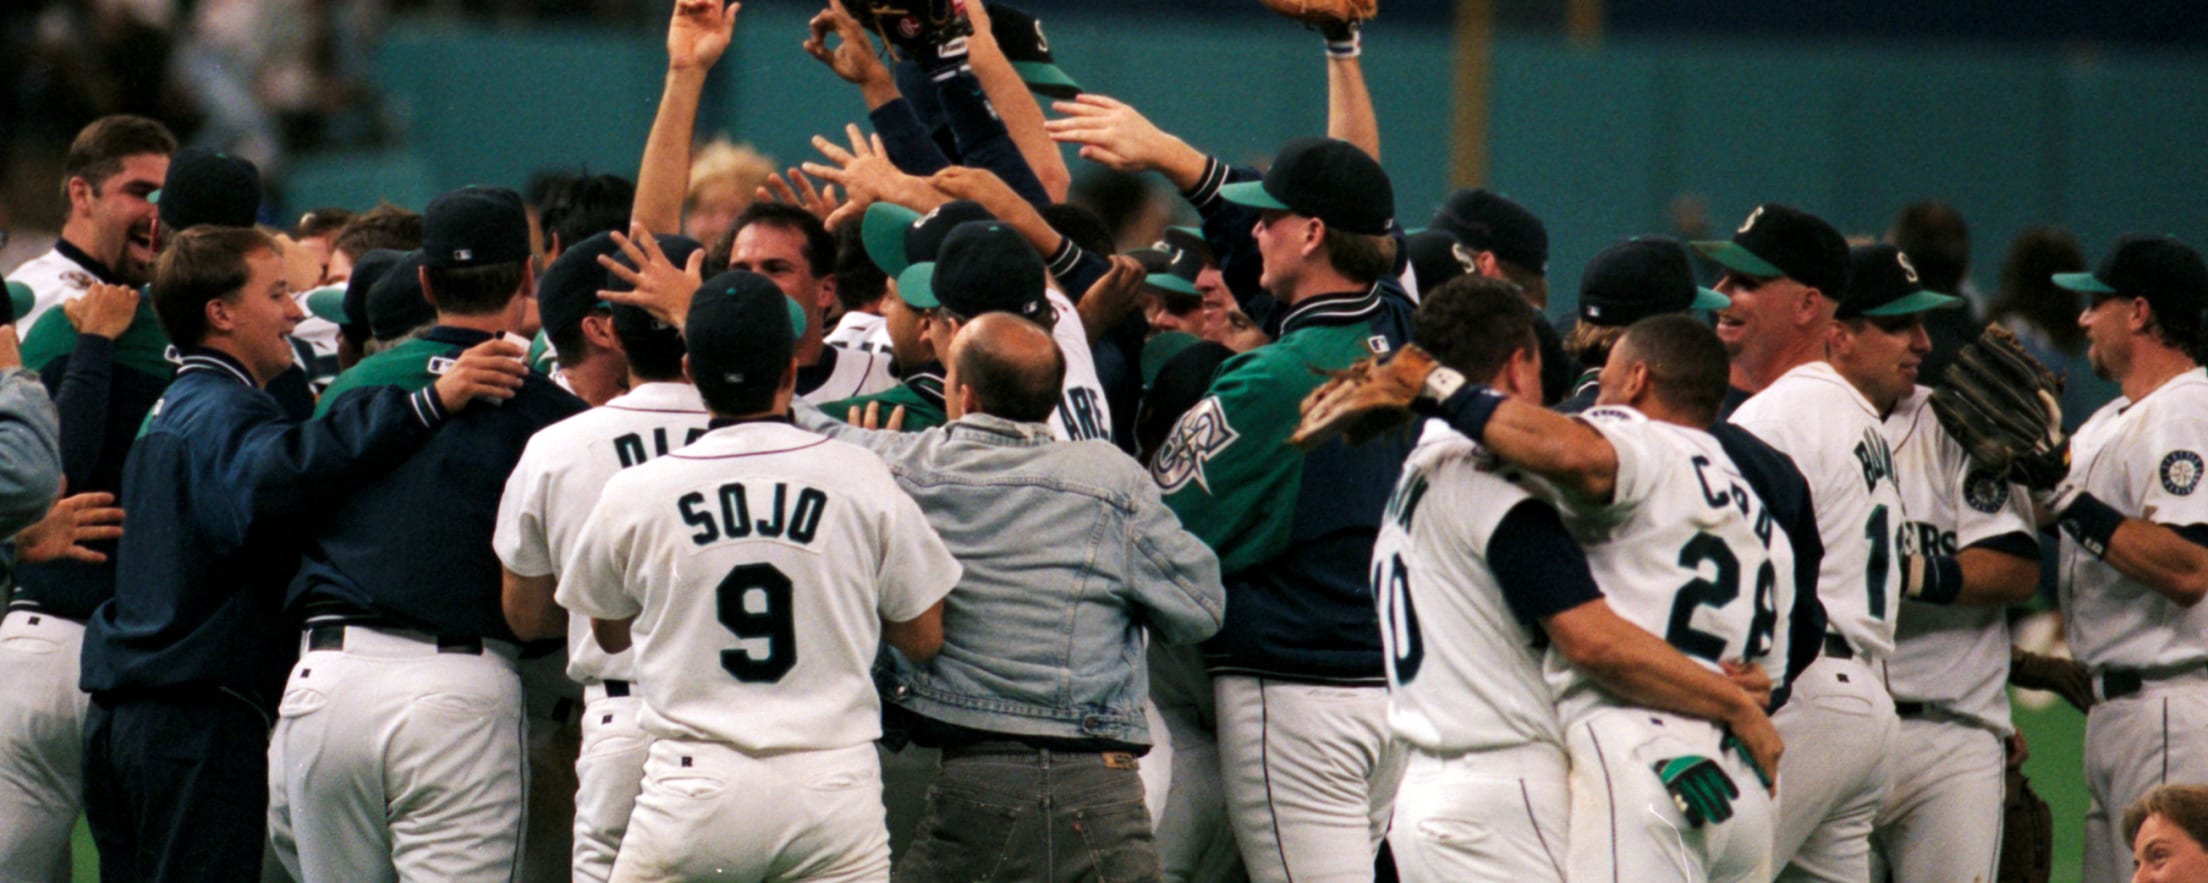 Classic Mariners Games: Jay Buhner Becomes First Mariner to Hit